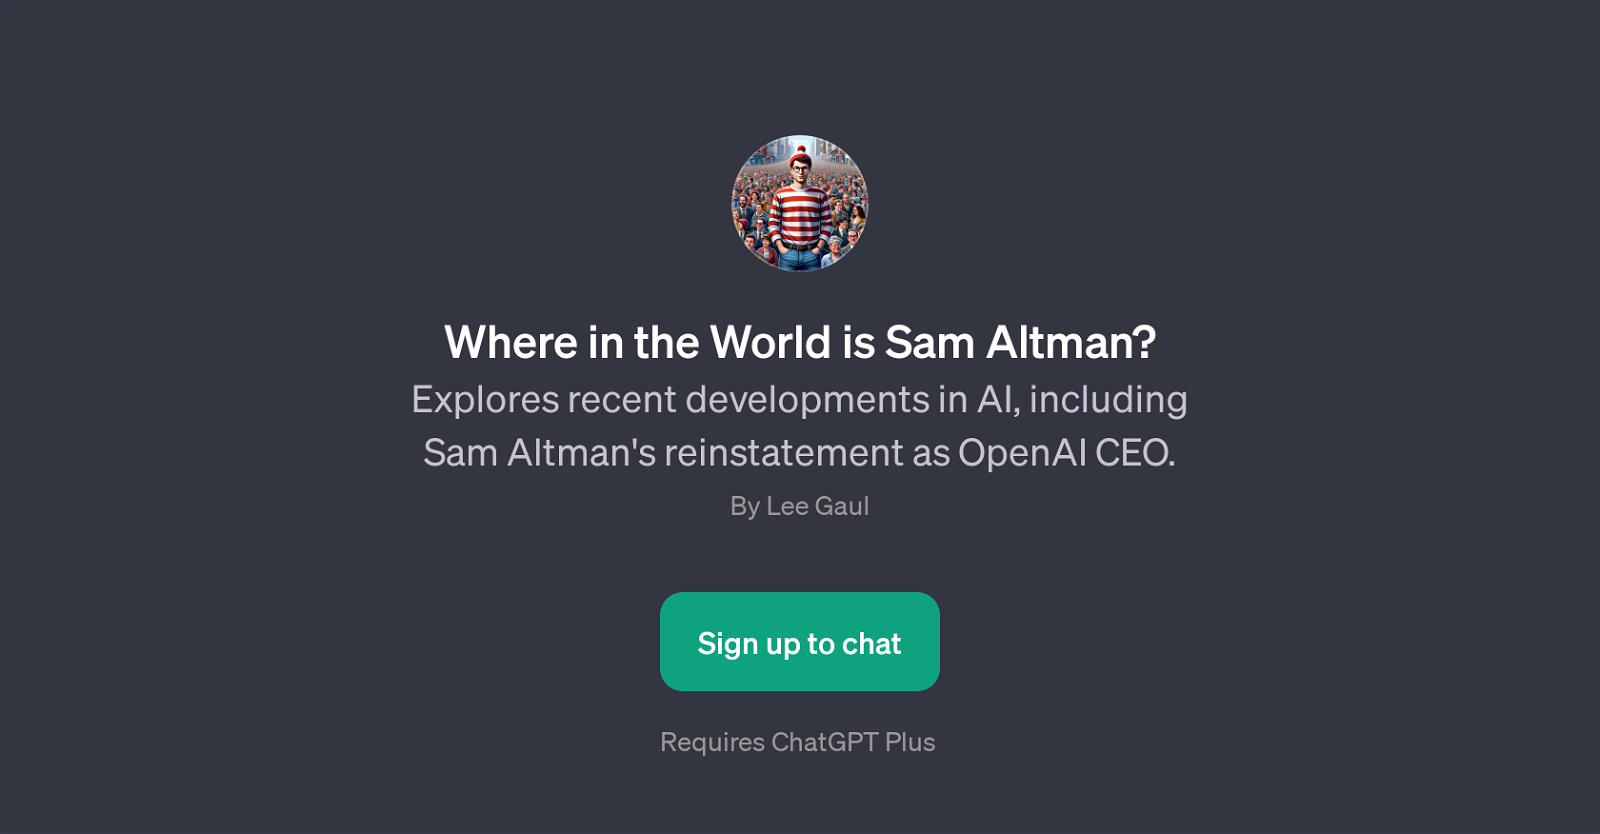 Where in the World is Sam Altman? website